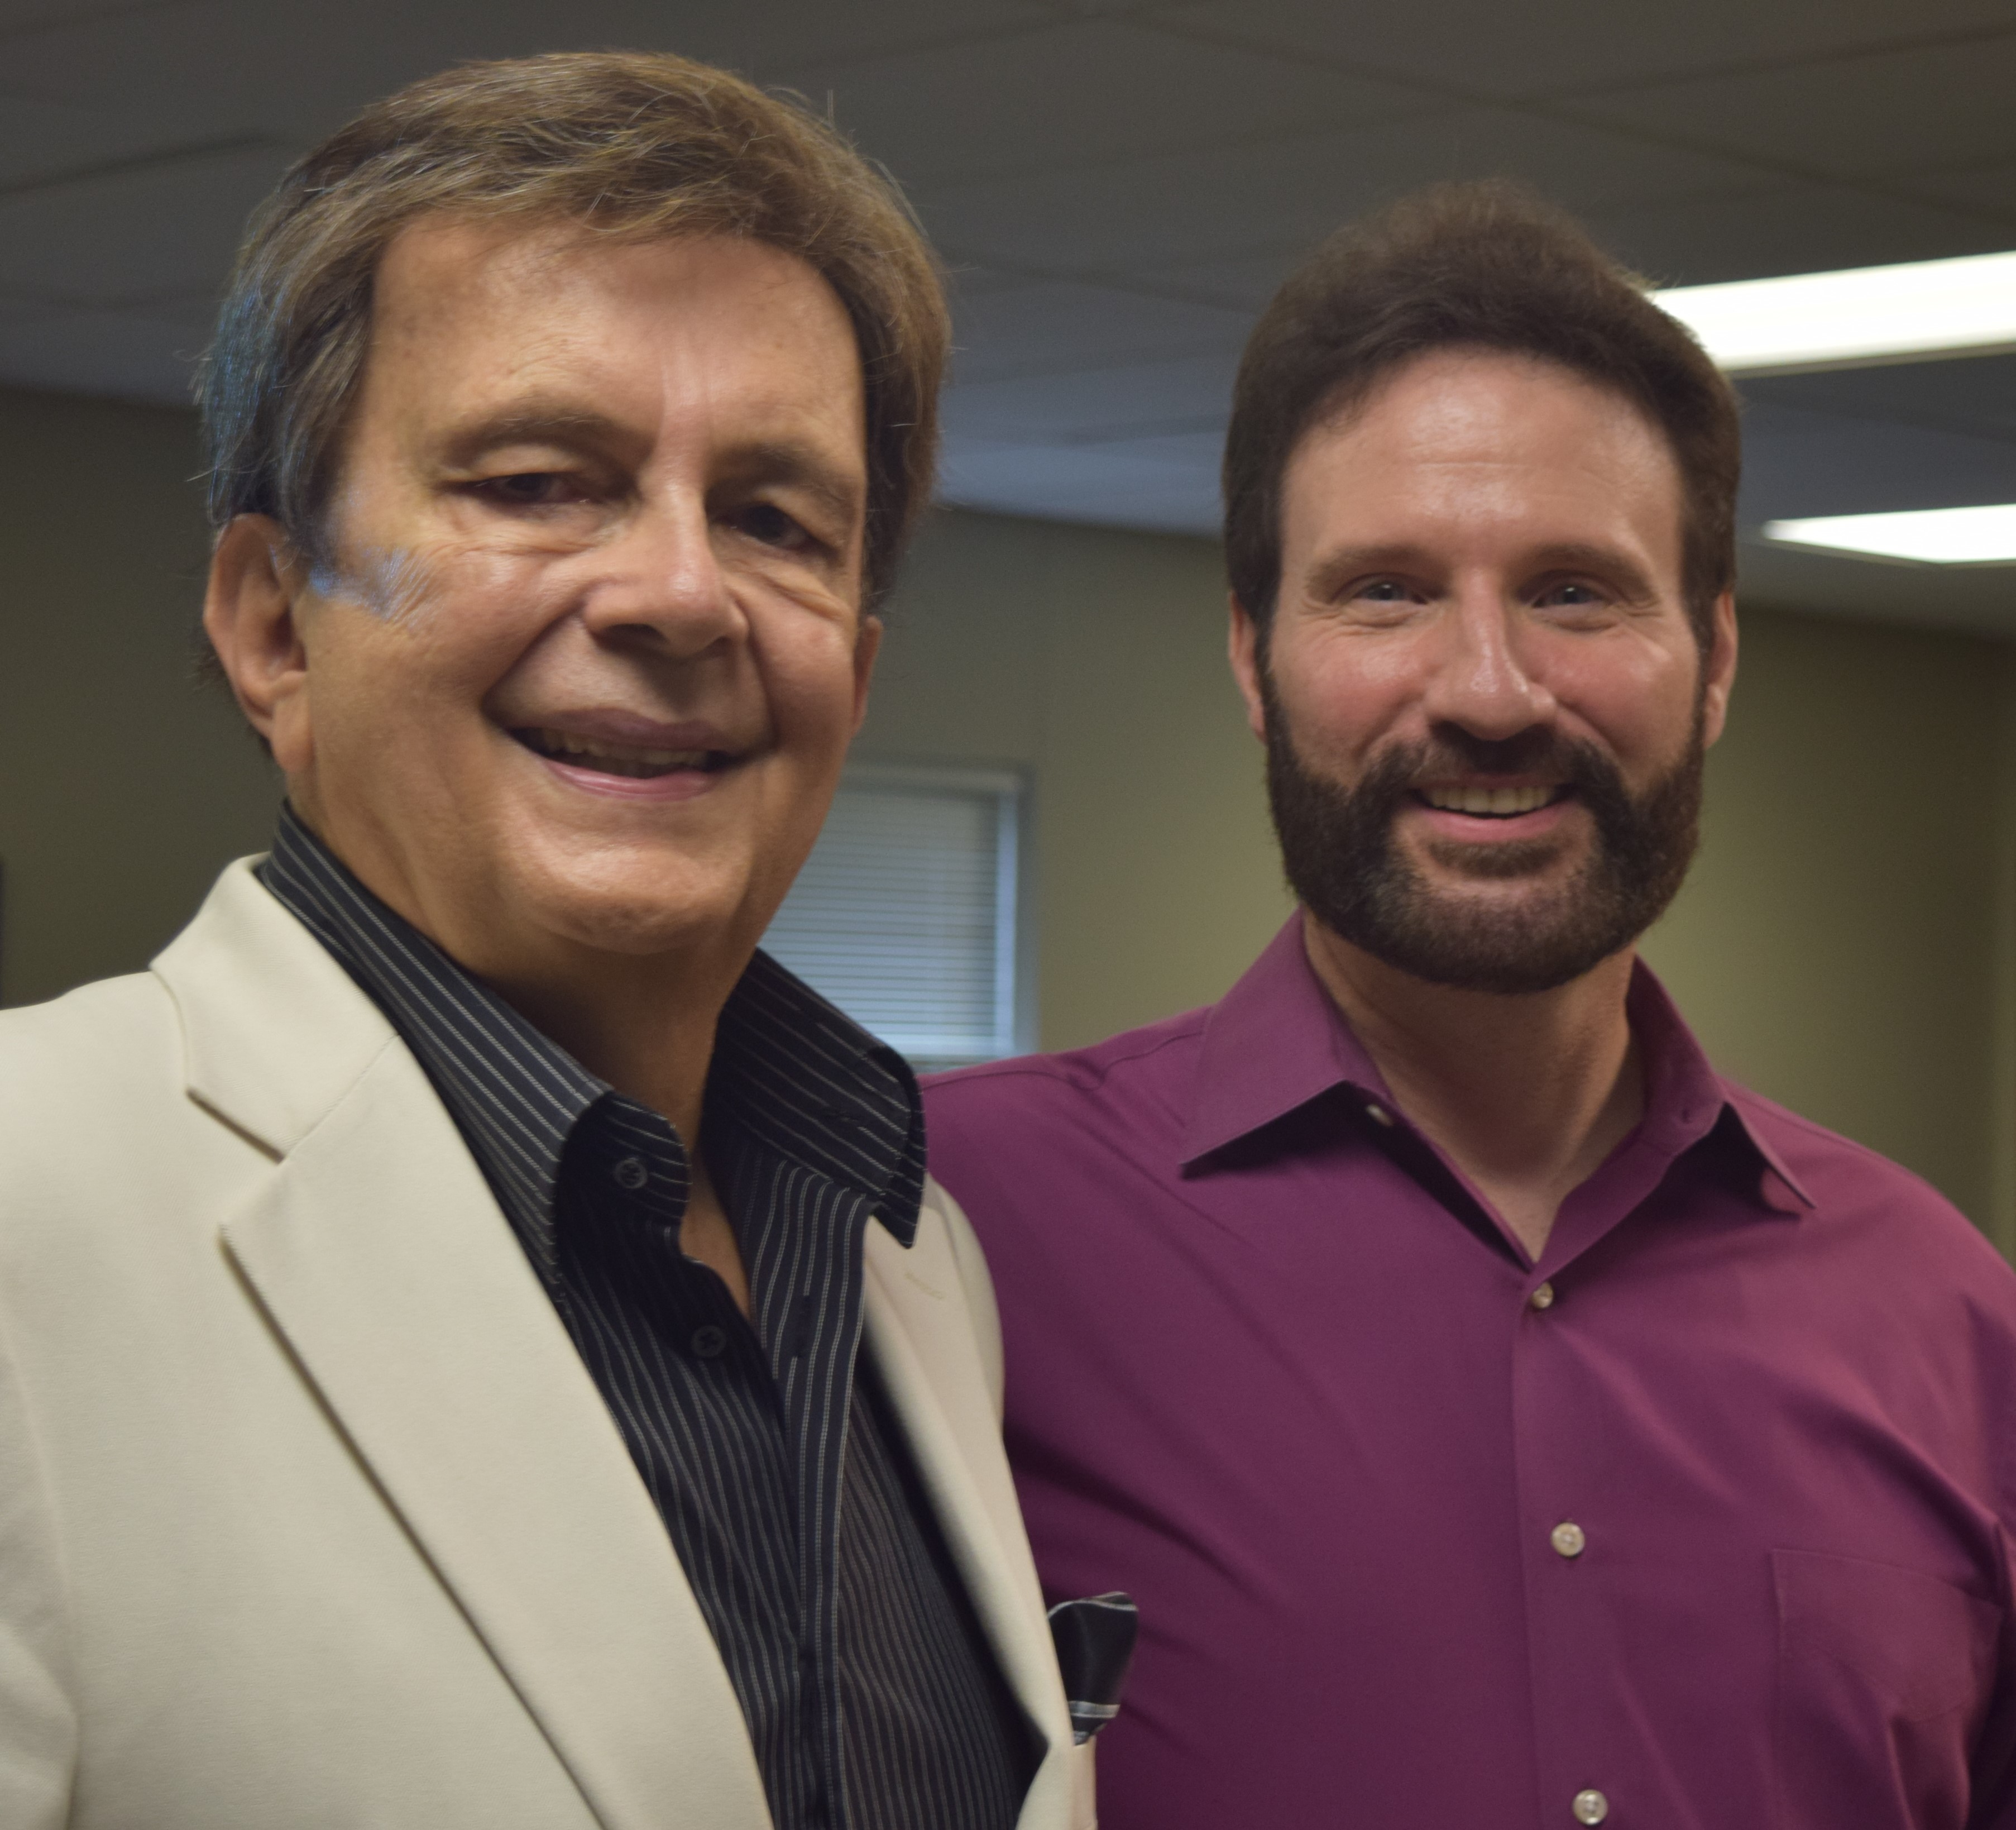 From left are Ed Silvoso and Chuck Proudfit, founder and president of At Work on Purpose.